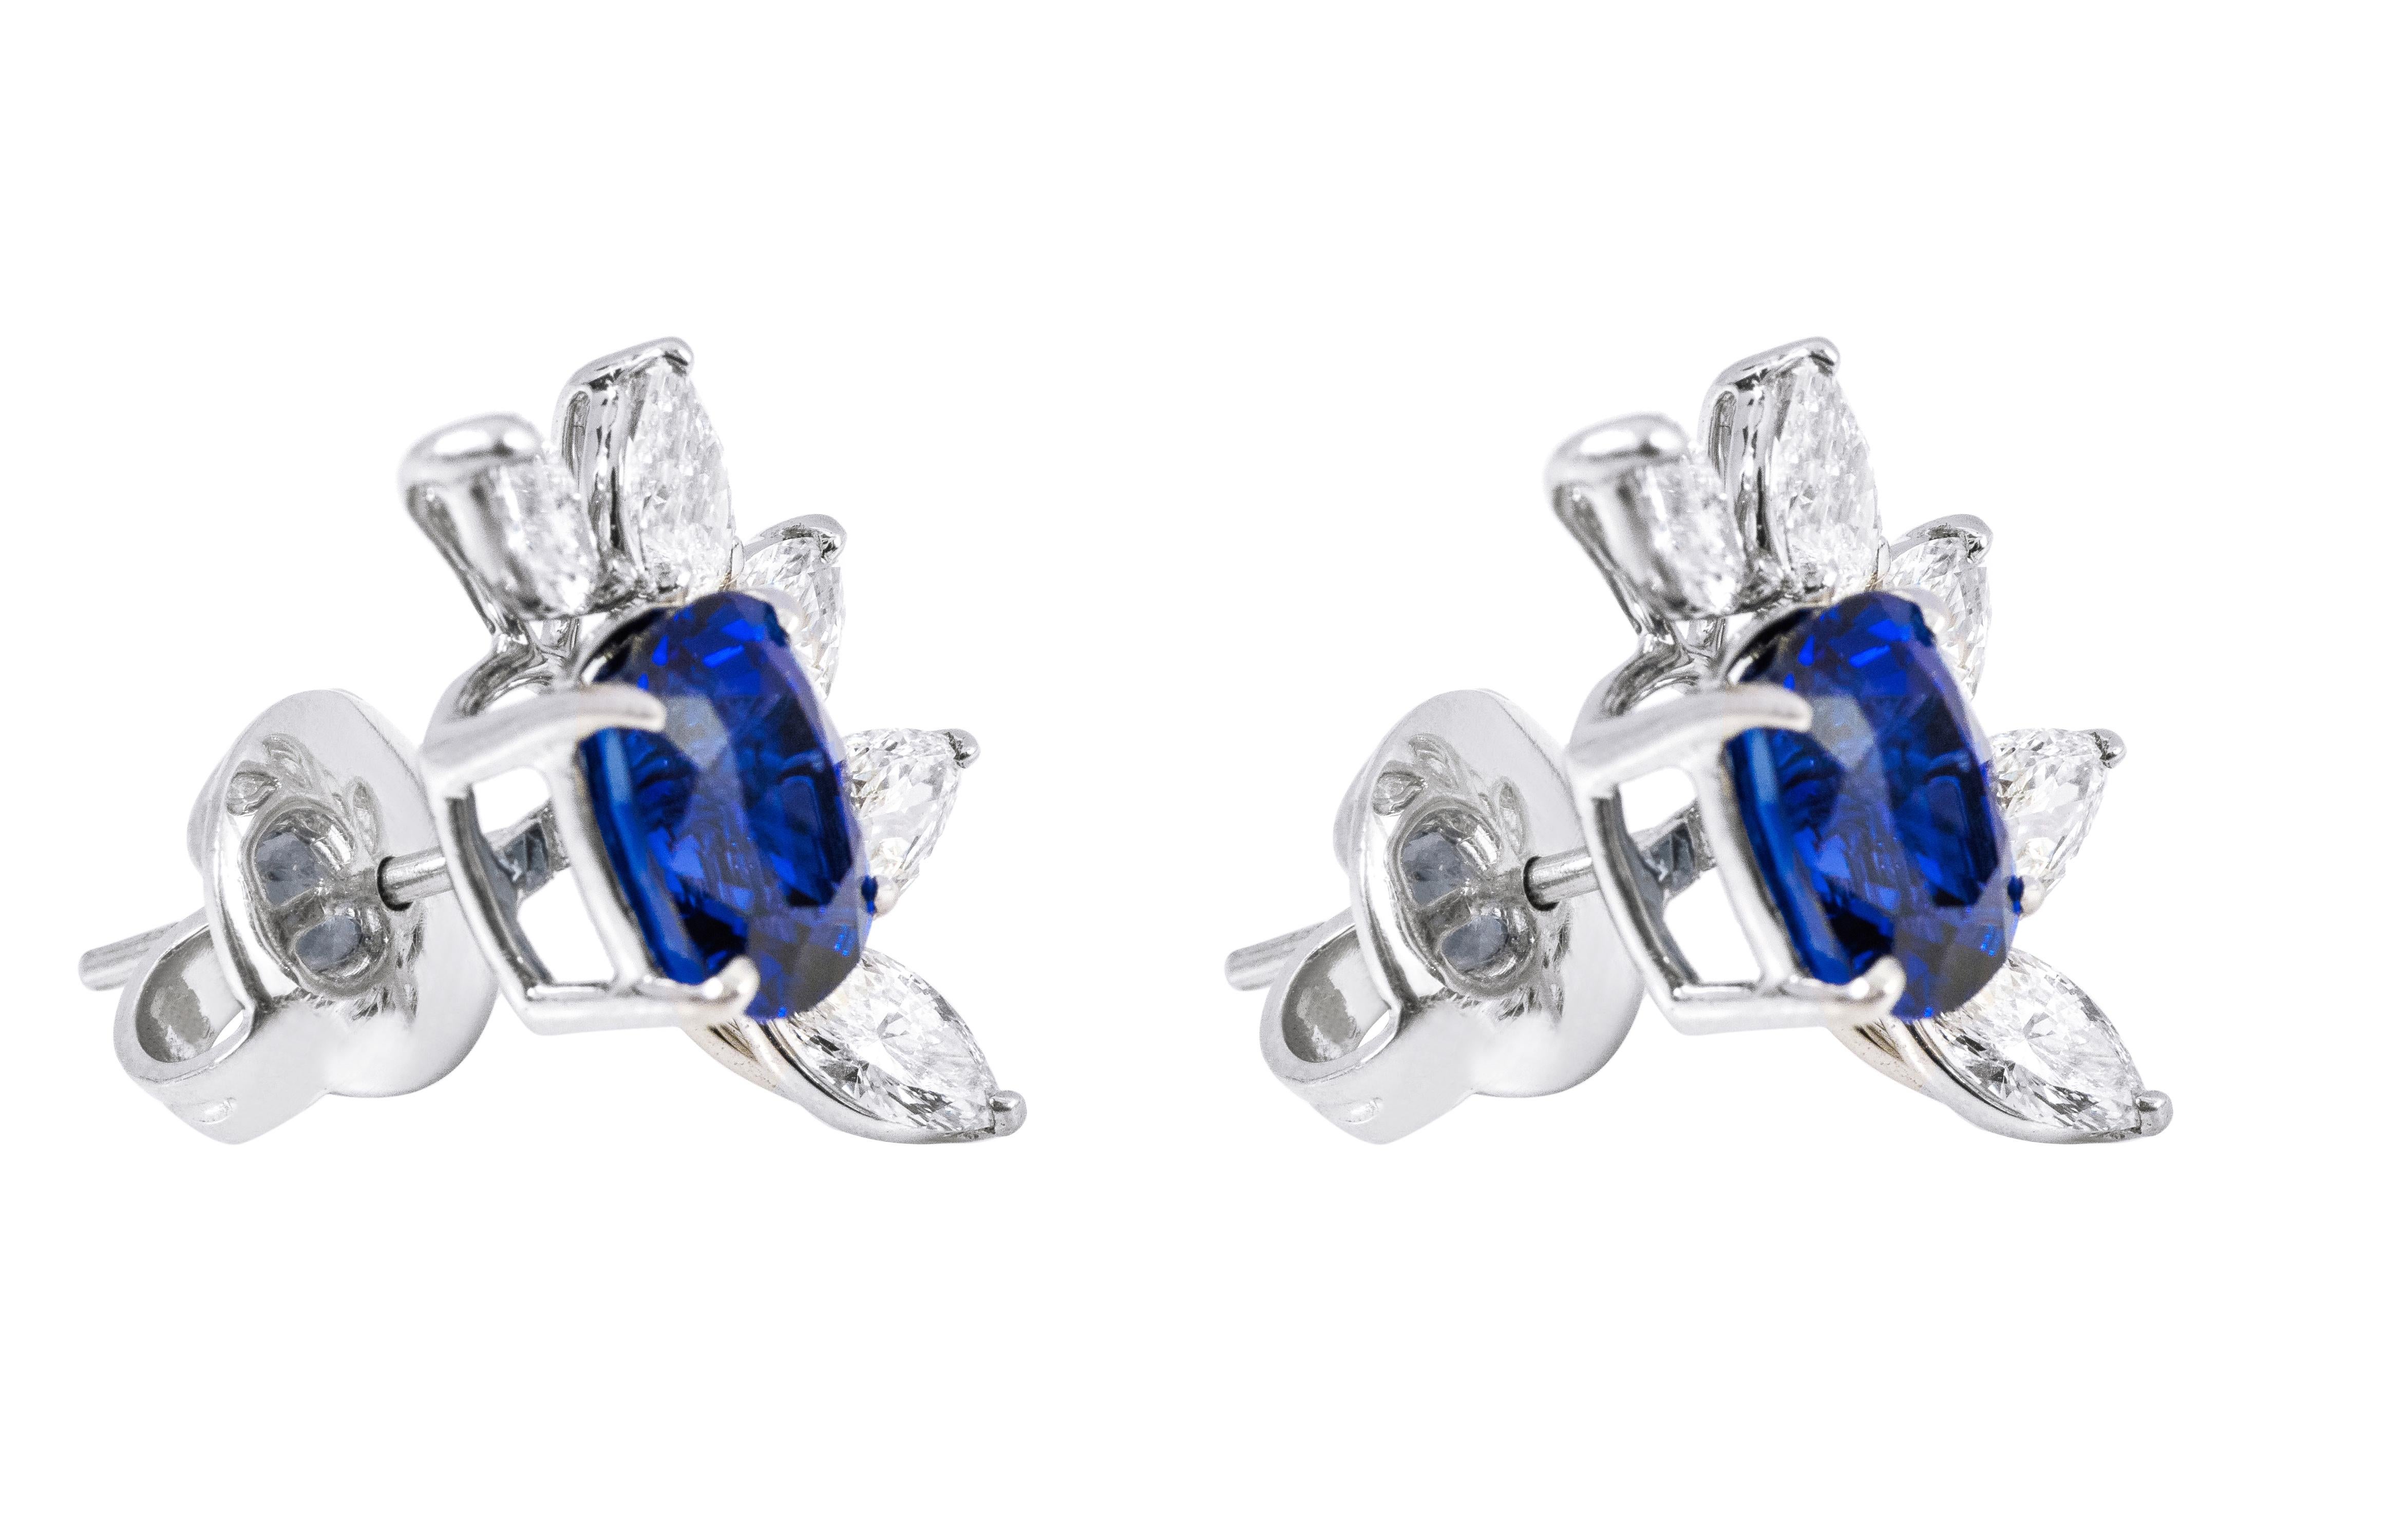 Cushion Cut Platinum GIA Certified 10.54 Carats Sapphire and Diamond Cocktail Stud Earrings For Sale